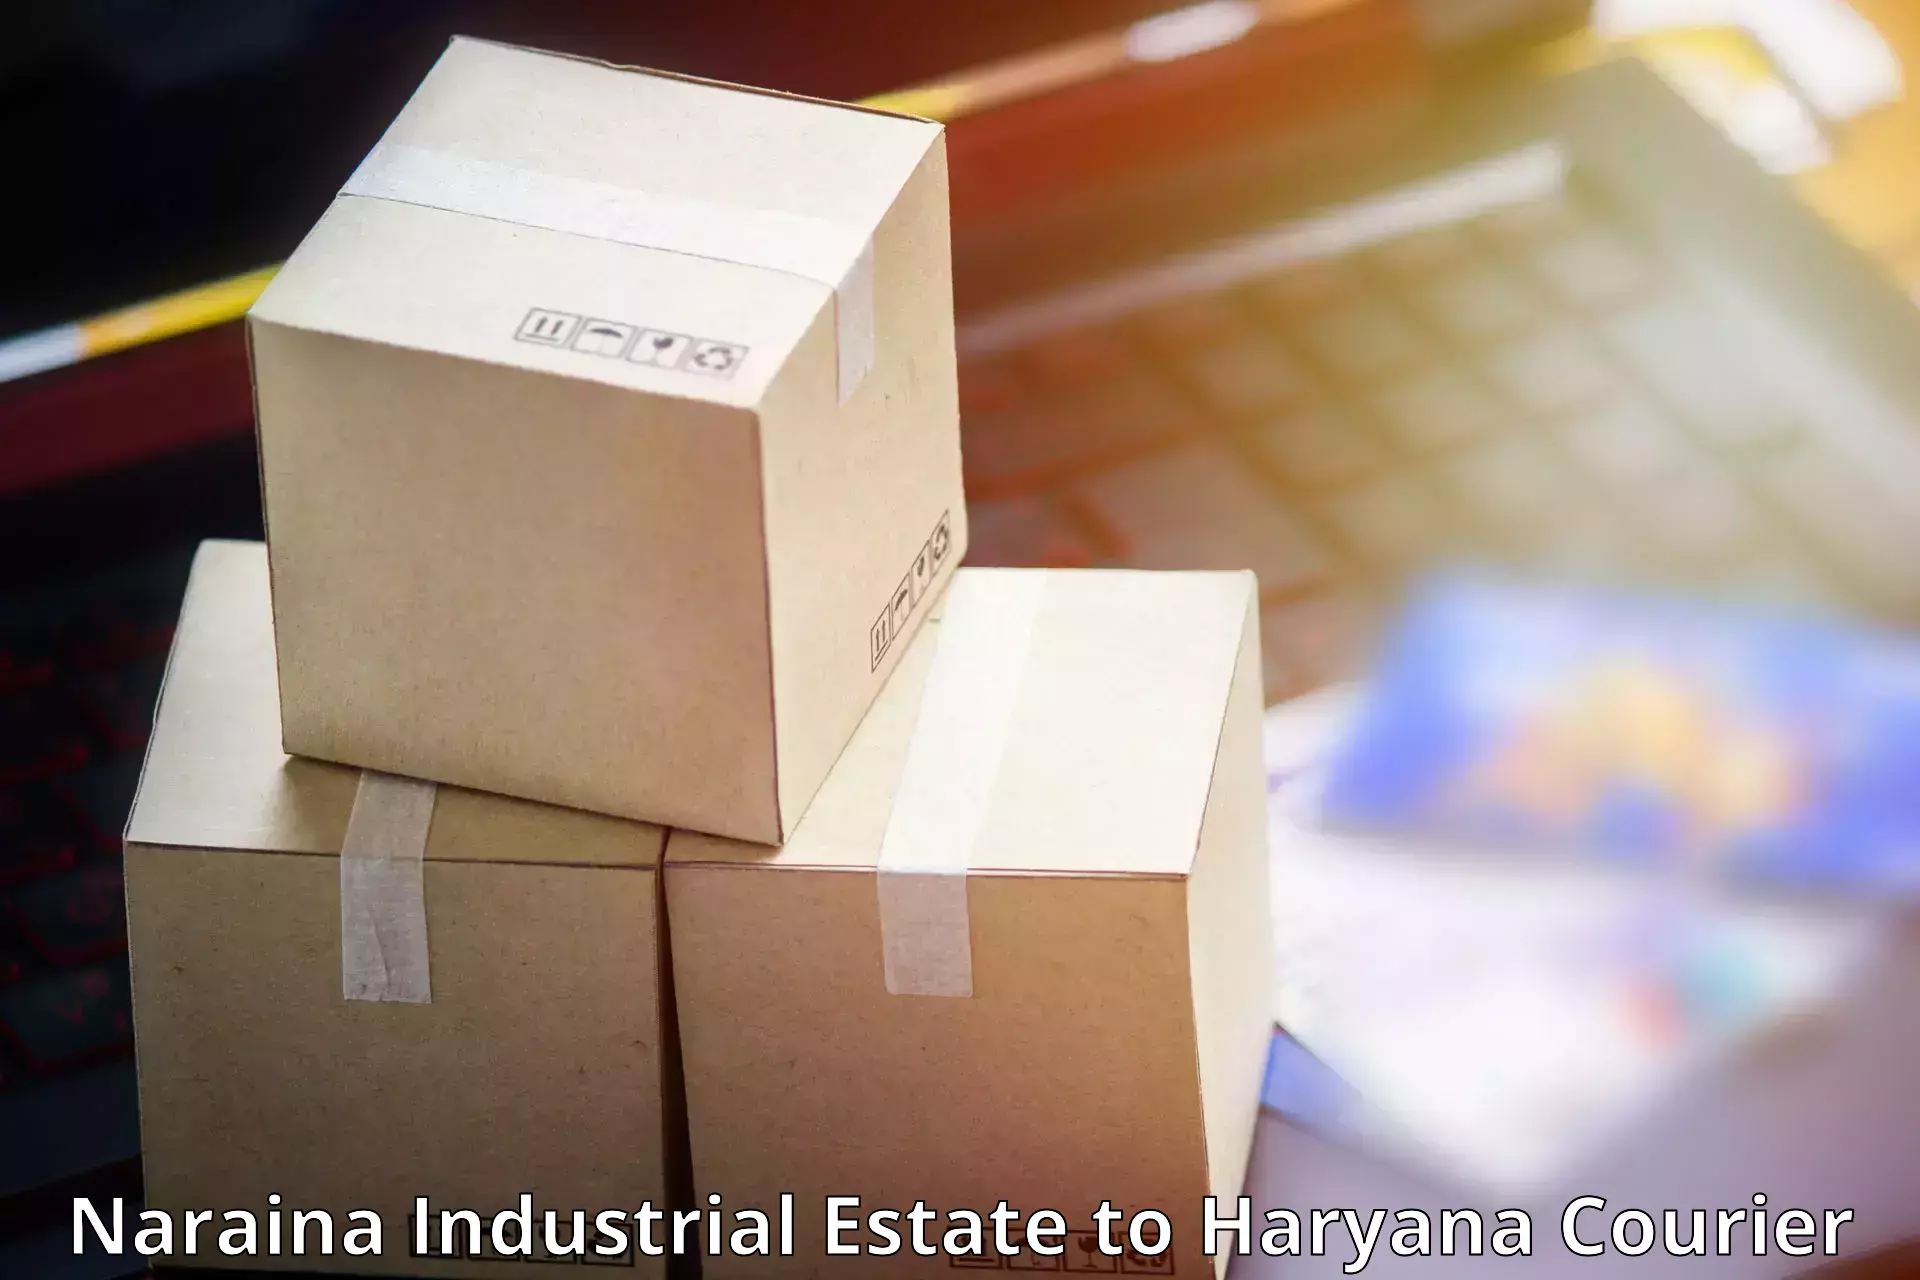 Cash on delivery service Naraina Industrial Estate to Haryana